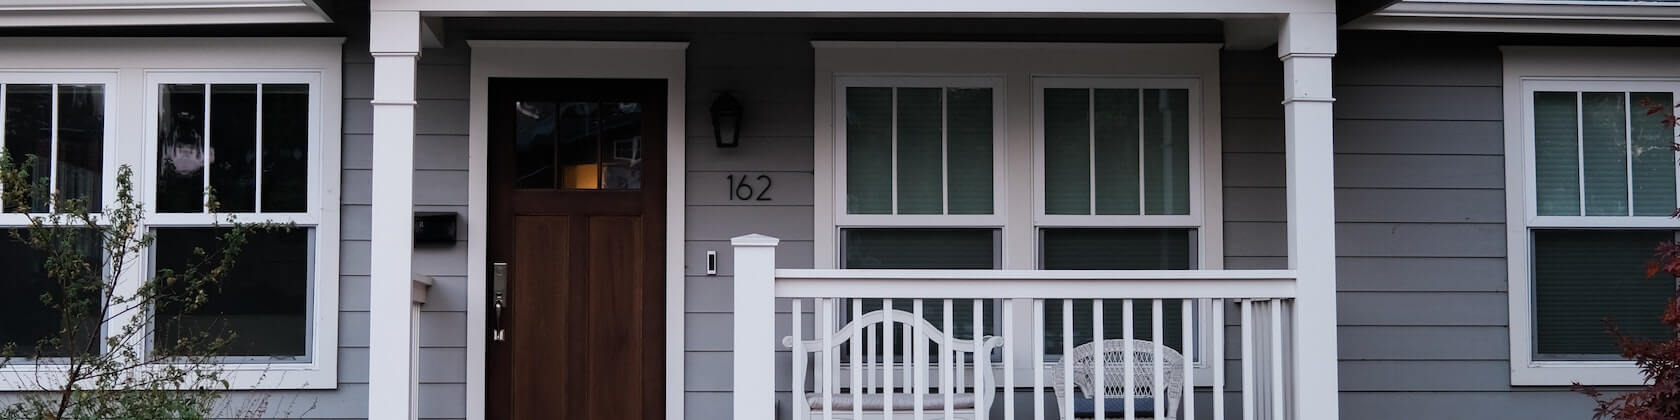 Front porch and entrance of home - Vancouver residential mortgages featured image